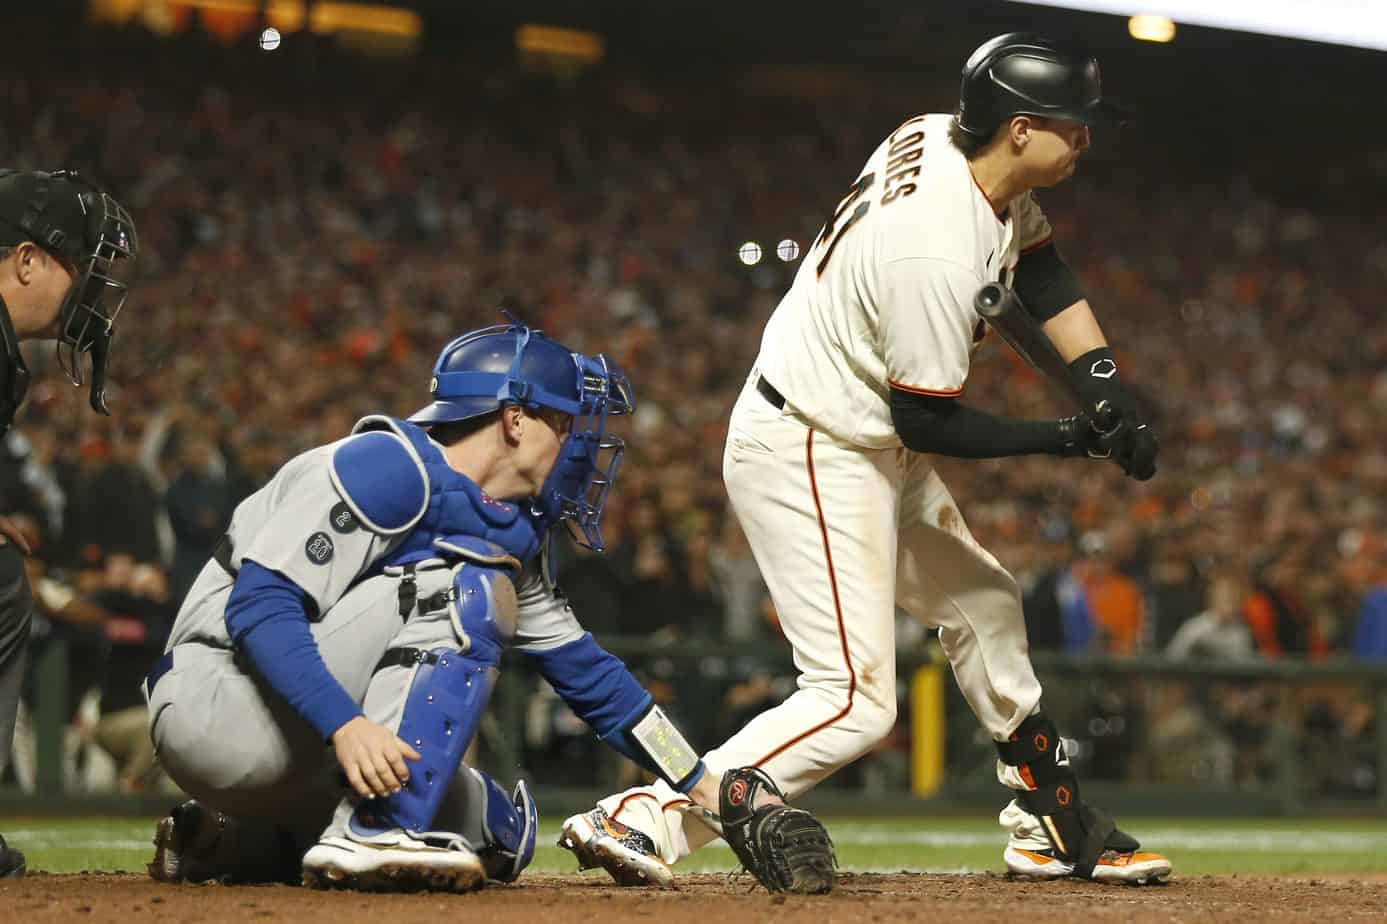 MLB umpire Gabe Morales responded to the criticism he was receiving over calling out Giants' Wilmer Flores to end the game on Thursday night